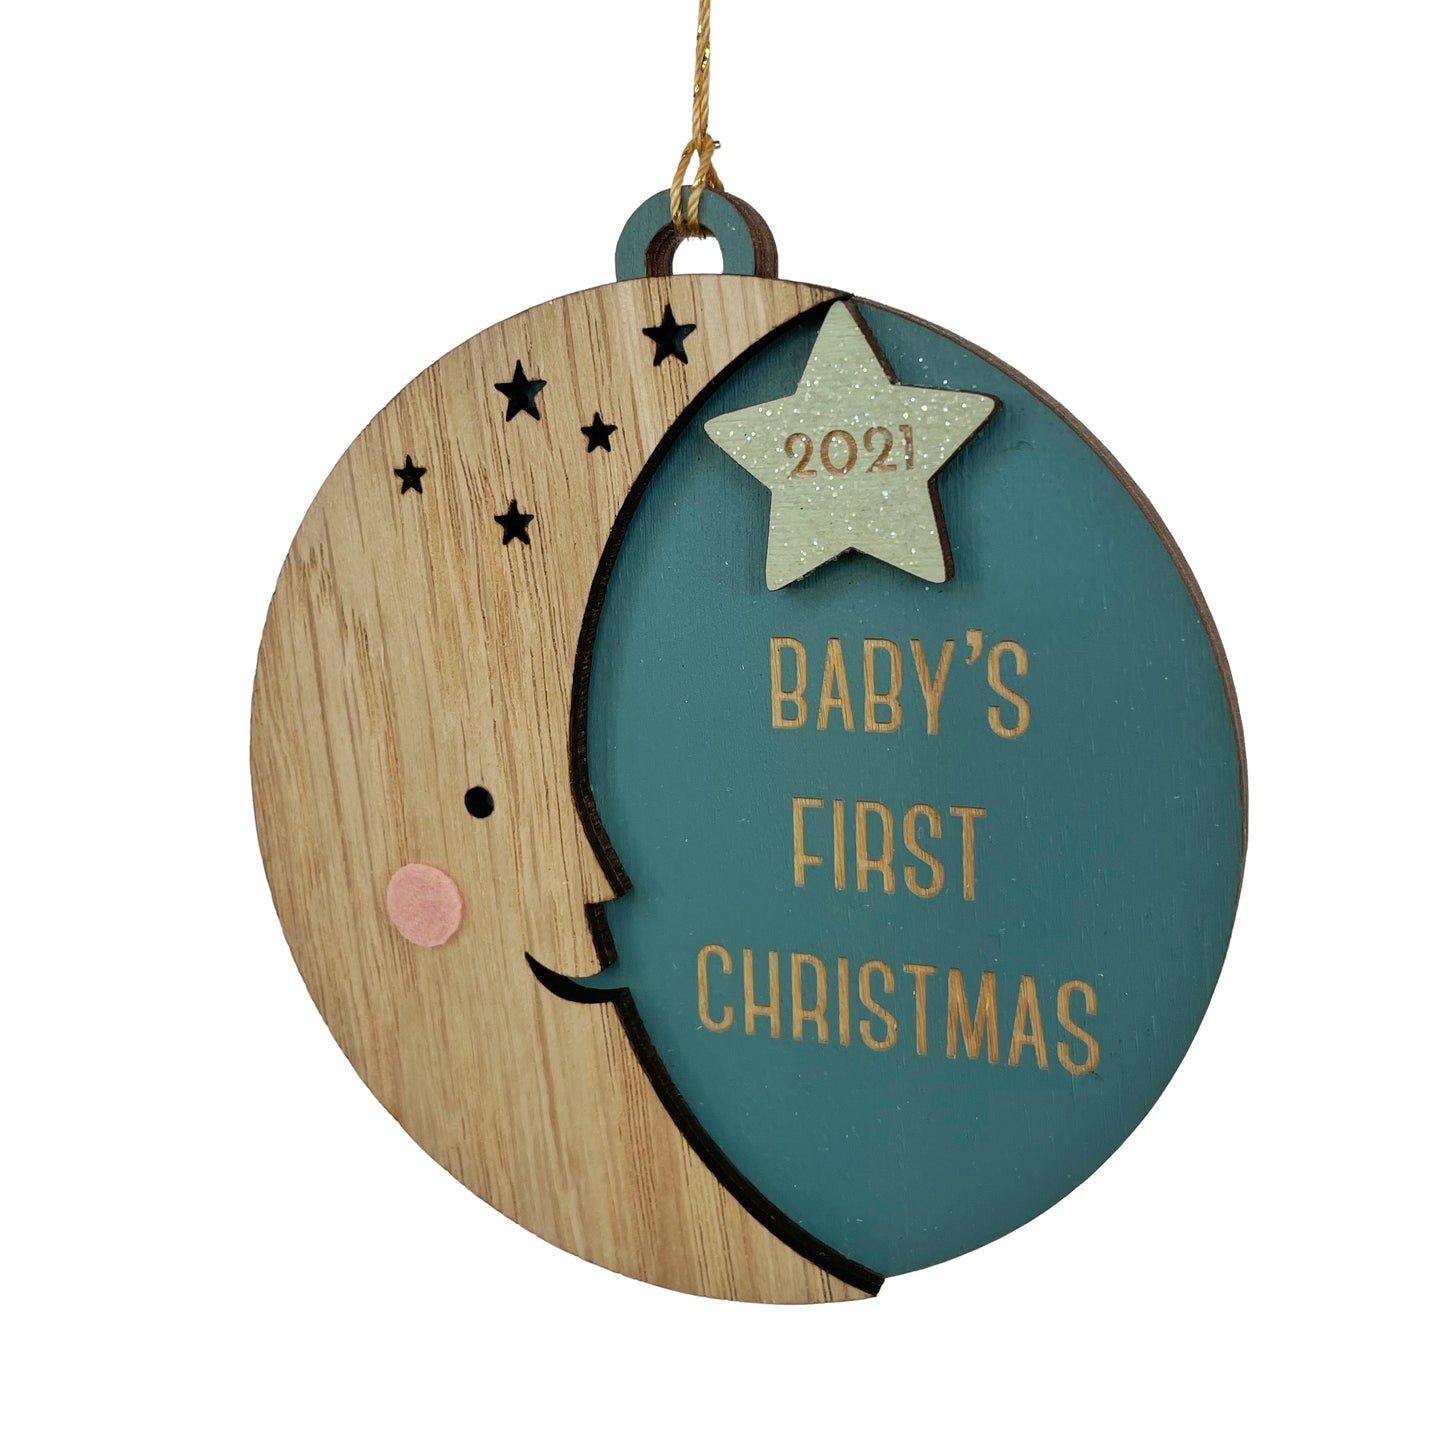 Baby's First Christmas Moon Ornament - Tree by Kerri Lee